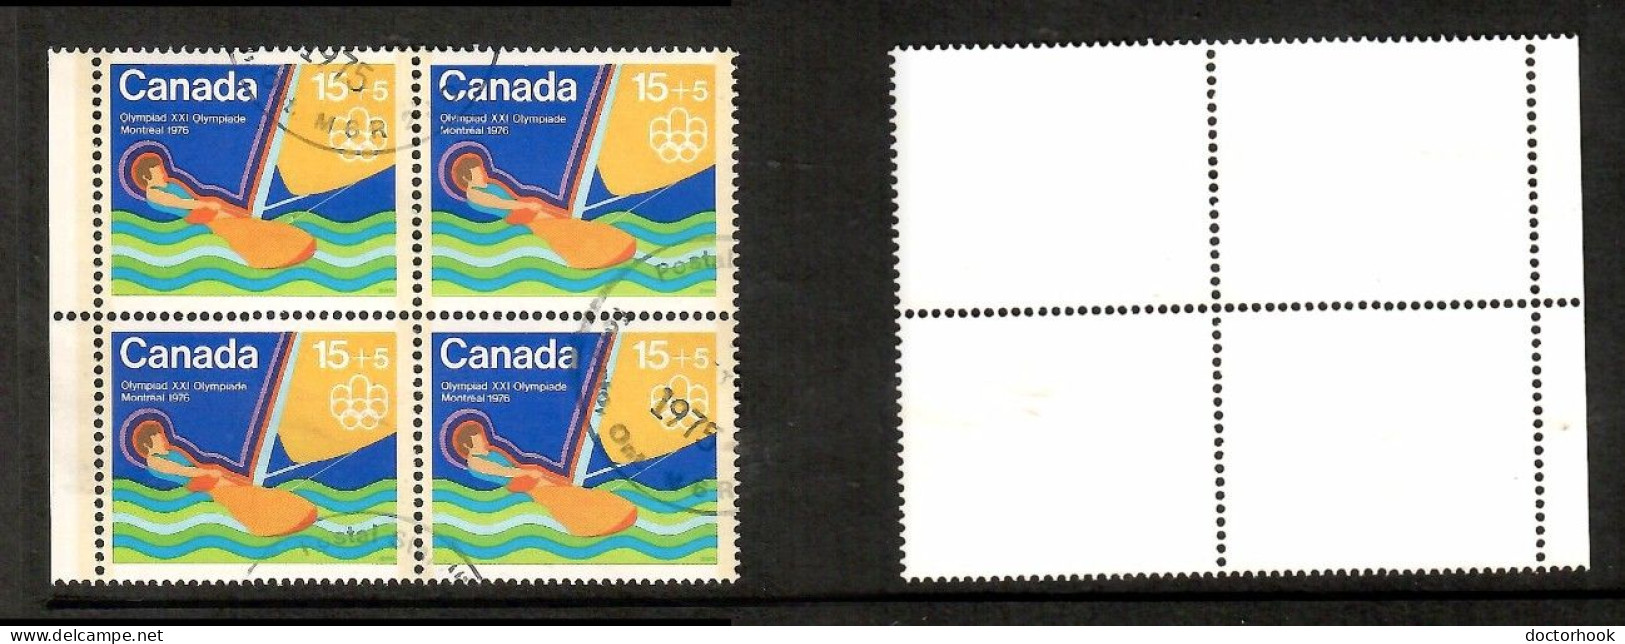 CANADA   Scott # B 6 USED BLOCK Of 4 (CONDITION AS PER SCAN) (CAN-211) - Hojas Bloque